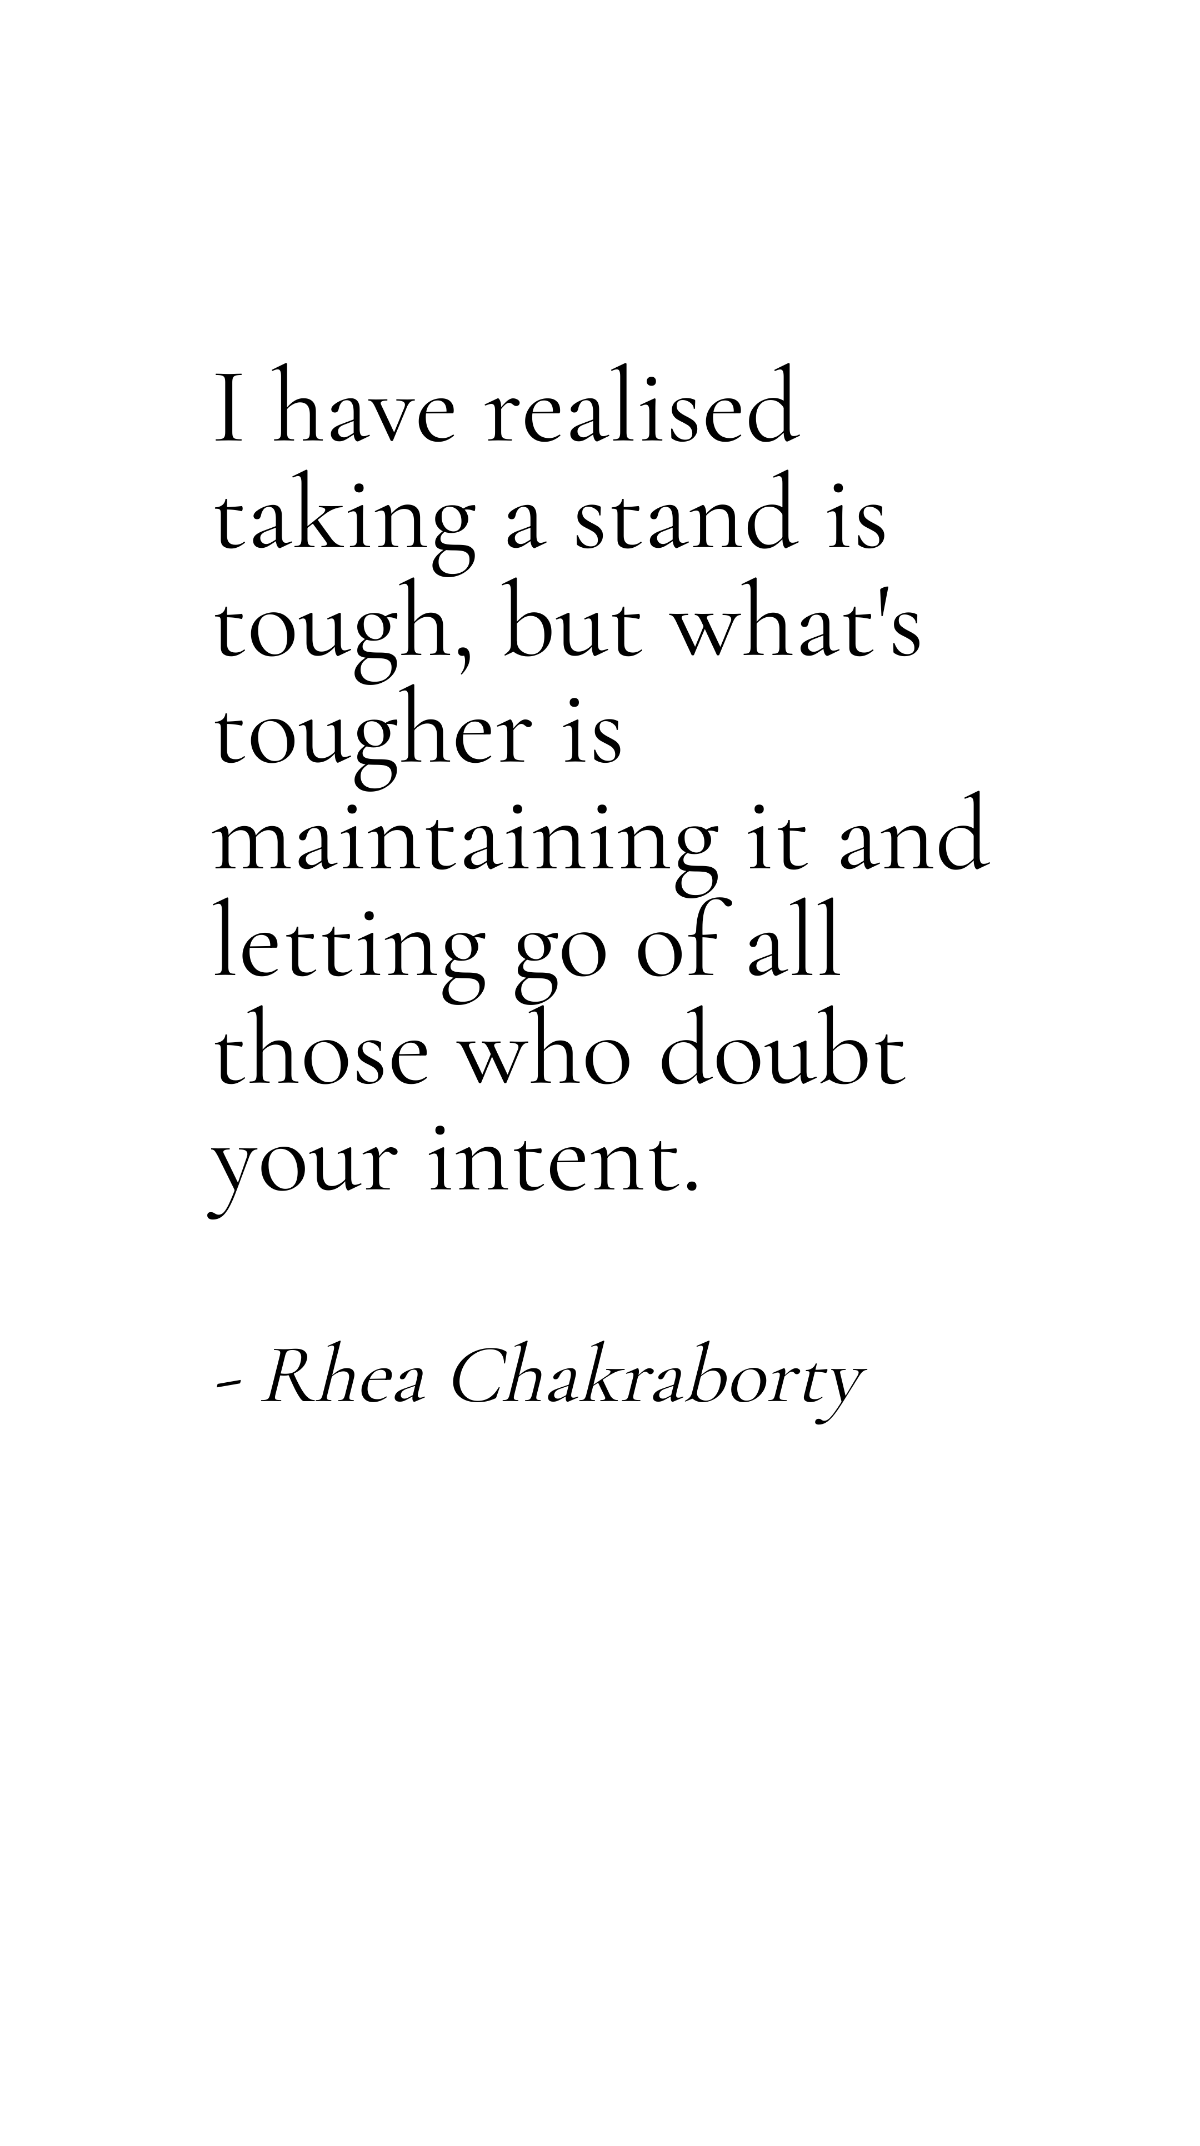 Free Rhea Chakraborty - I have realised taking a stand is tough, but what's tougher is maintaining it and letting go of all those who doubt your intent. Template